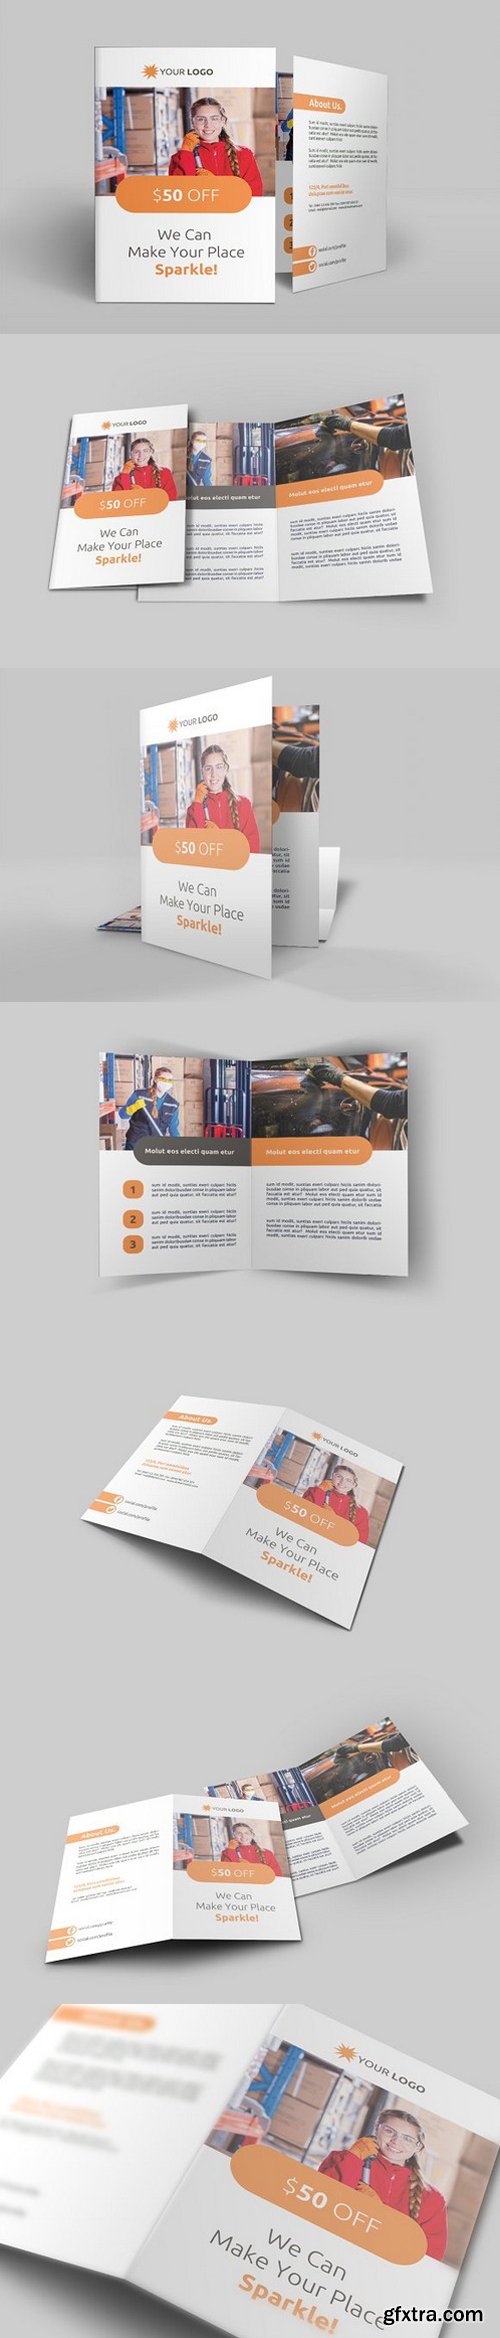 CM - Cleaning Services Bi-Fold Brochure 1697642